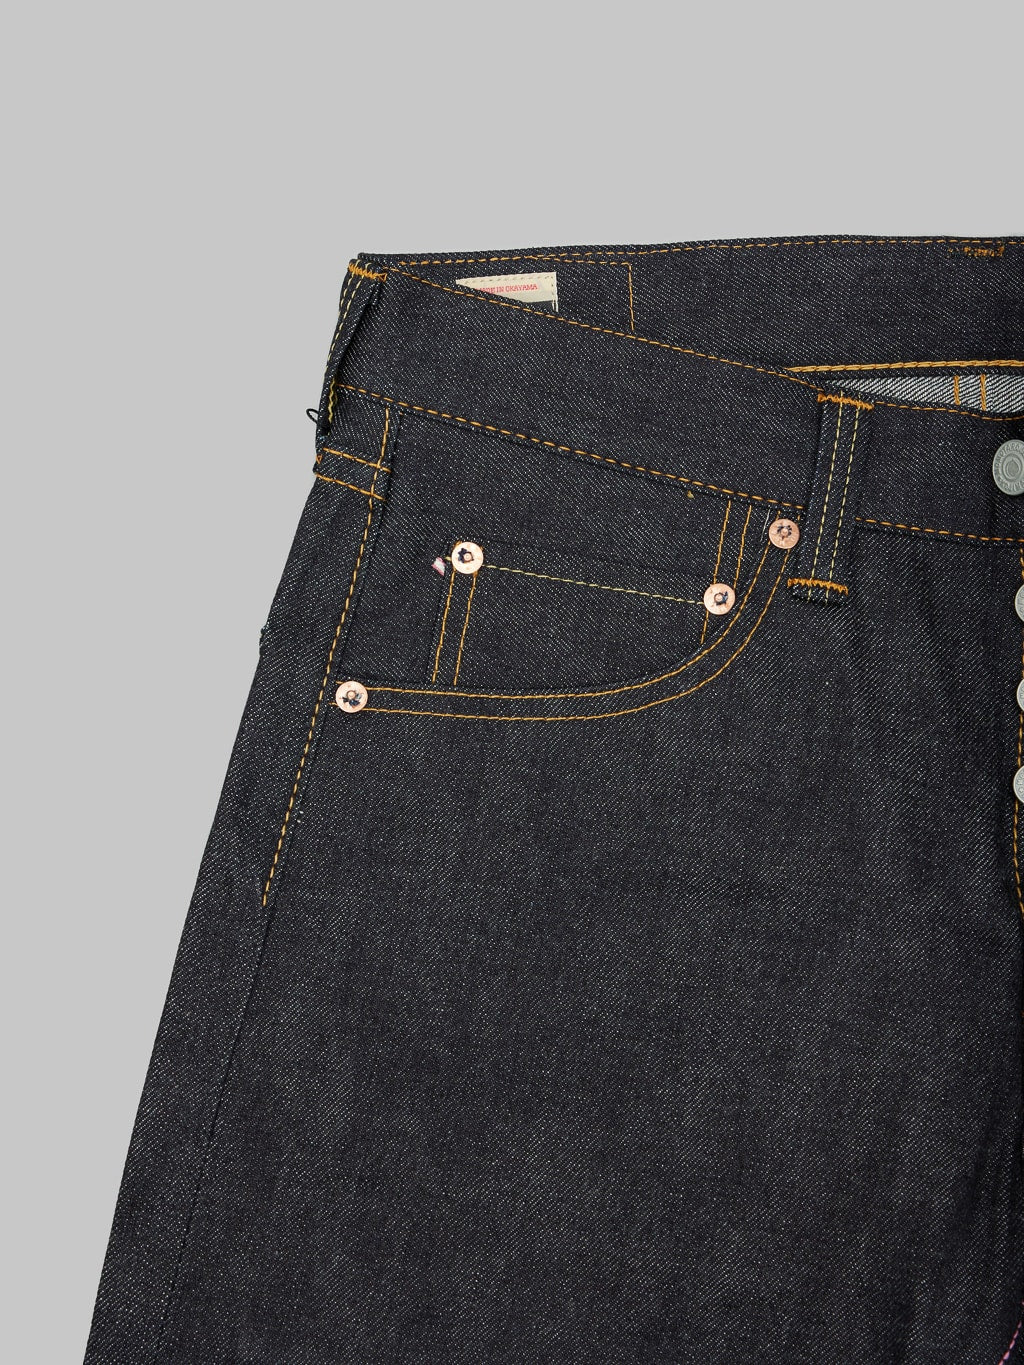 Momotaro 0405 12 going to batle 12oz high Tapered Jeans coin pocket